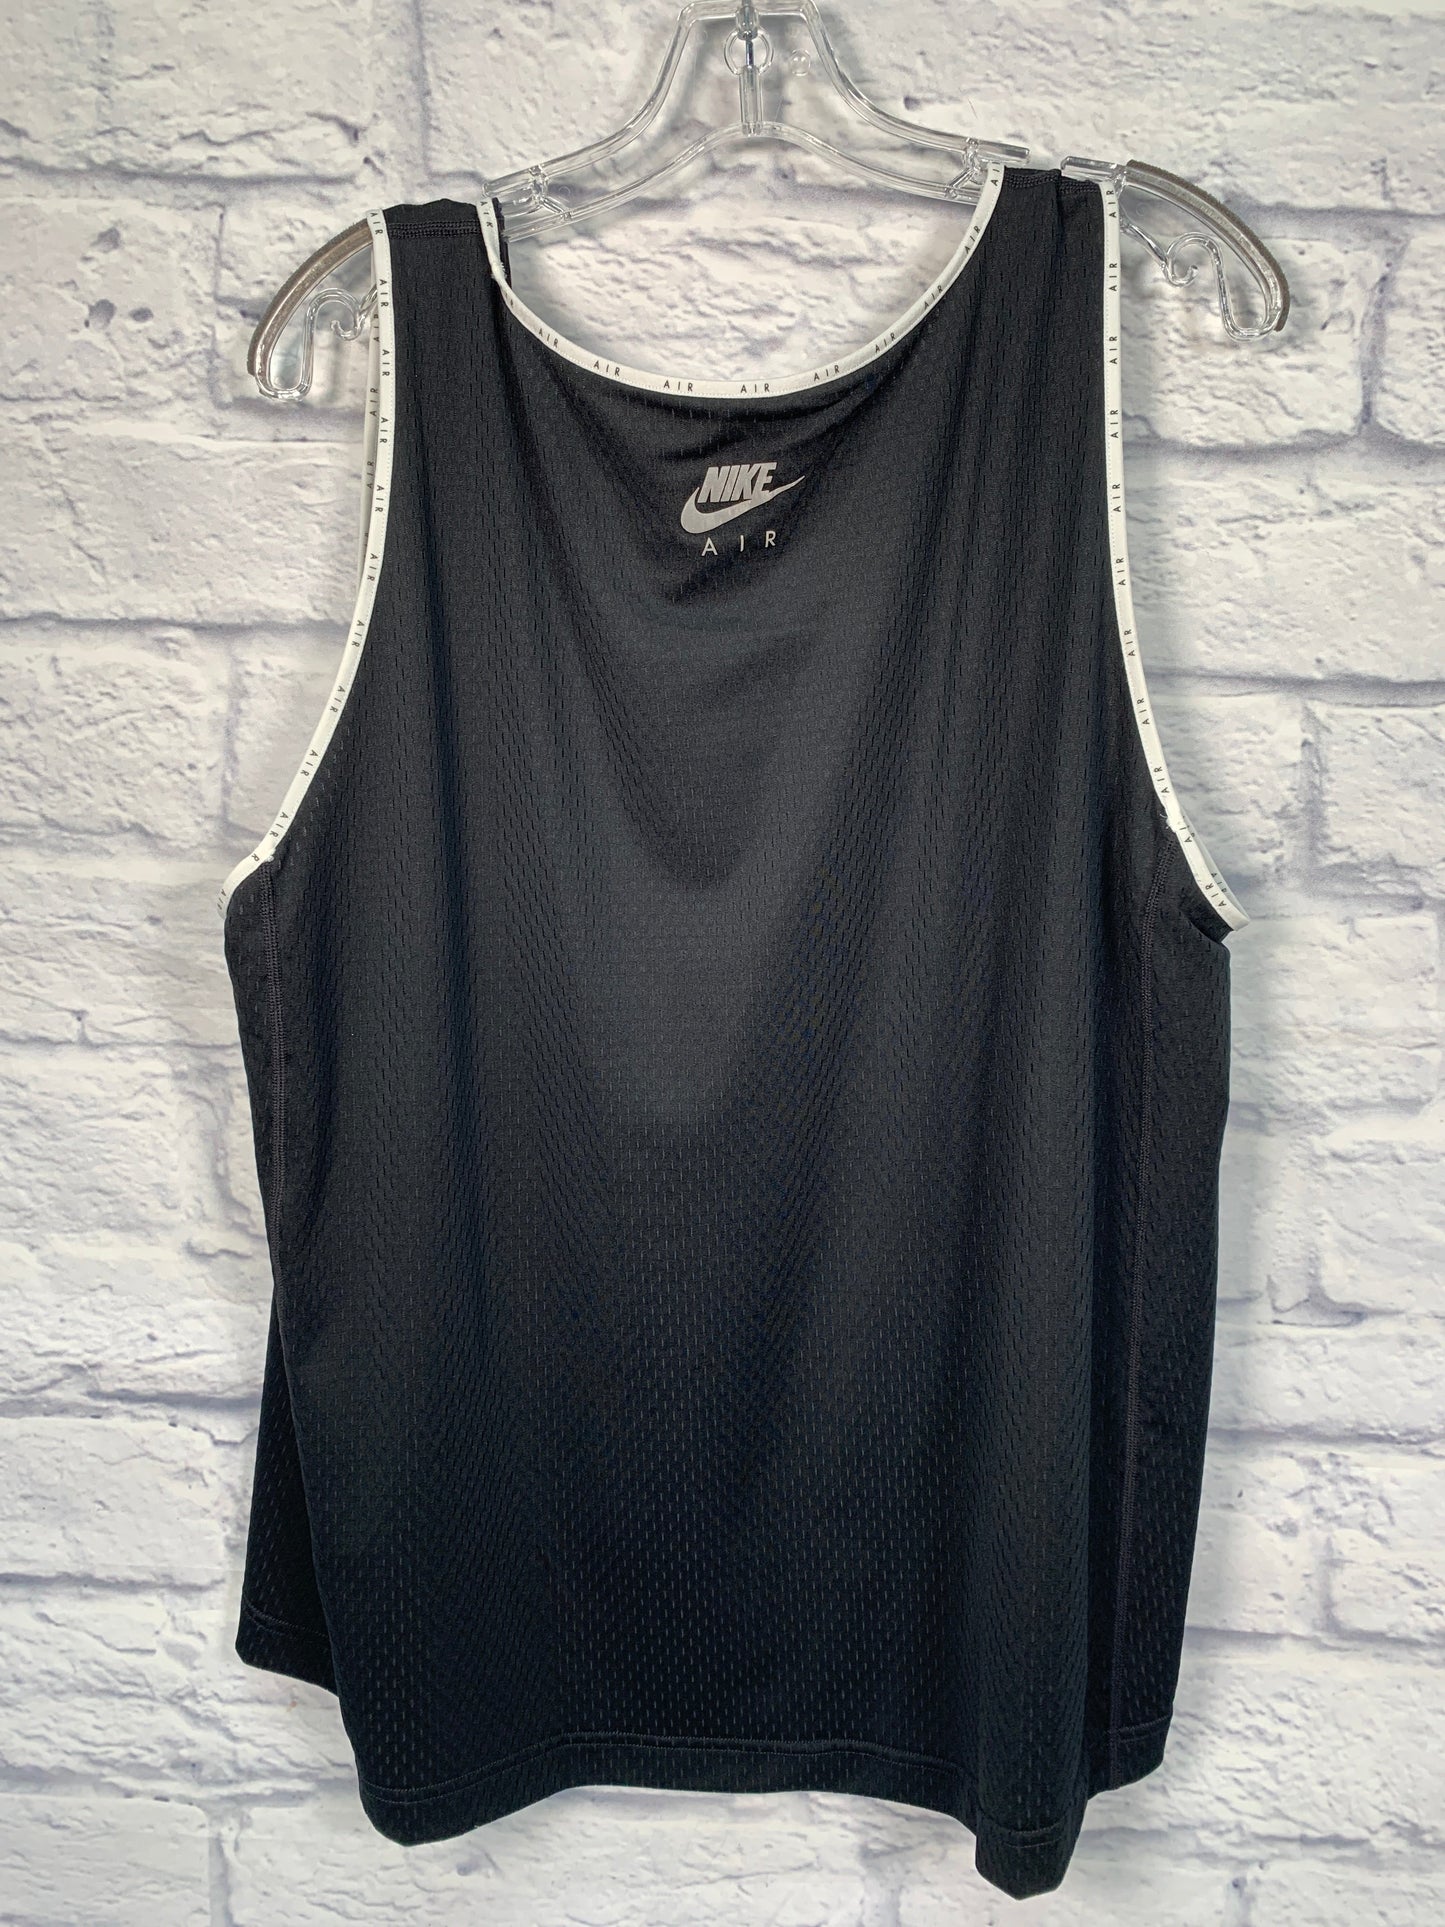 Athletic Tank Top By Nike Apparel  Size: 2x